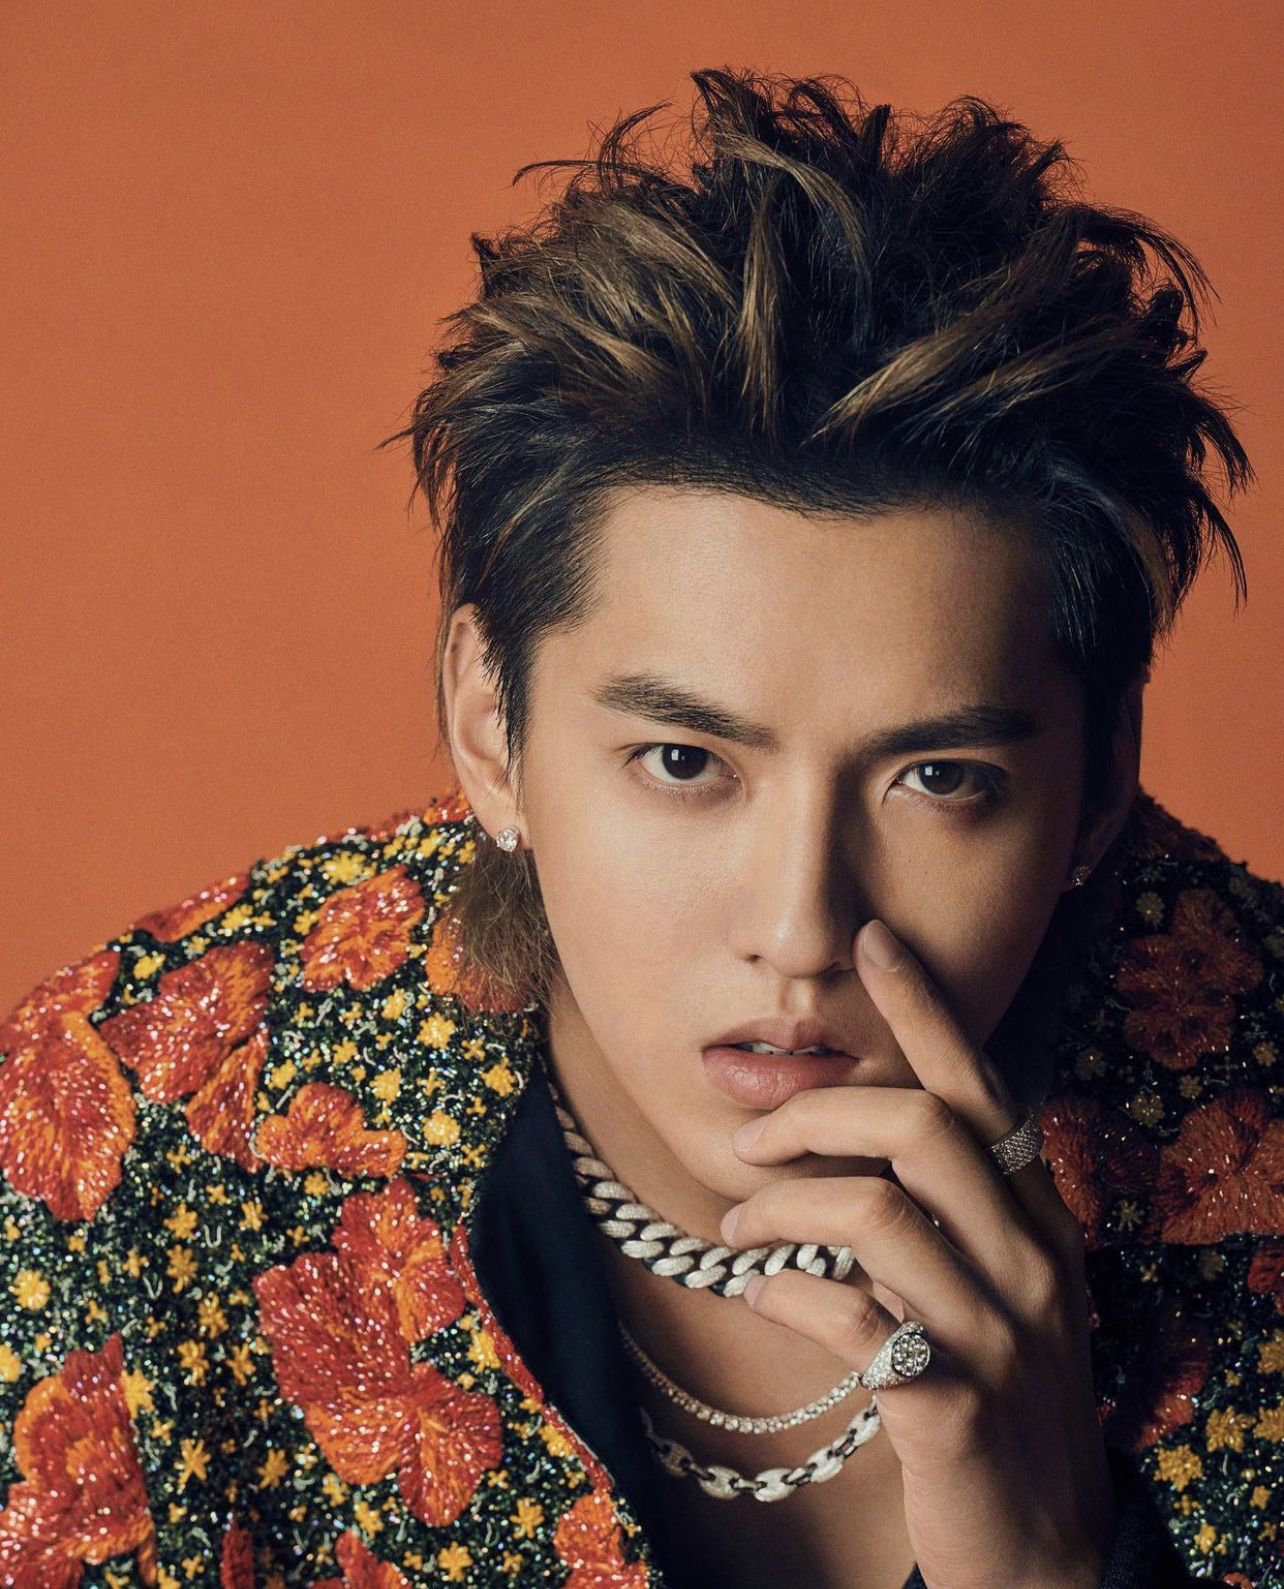 Former EXO Member Kris Wu Got The Youngest Daughter Of A J-Pop